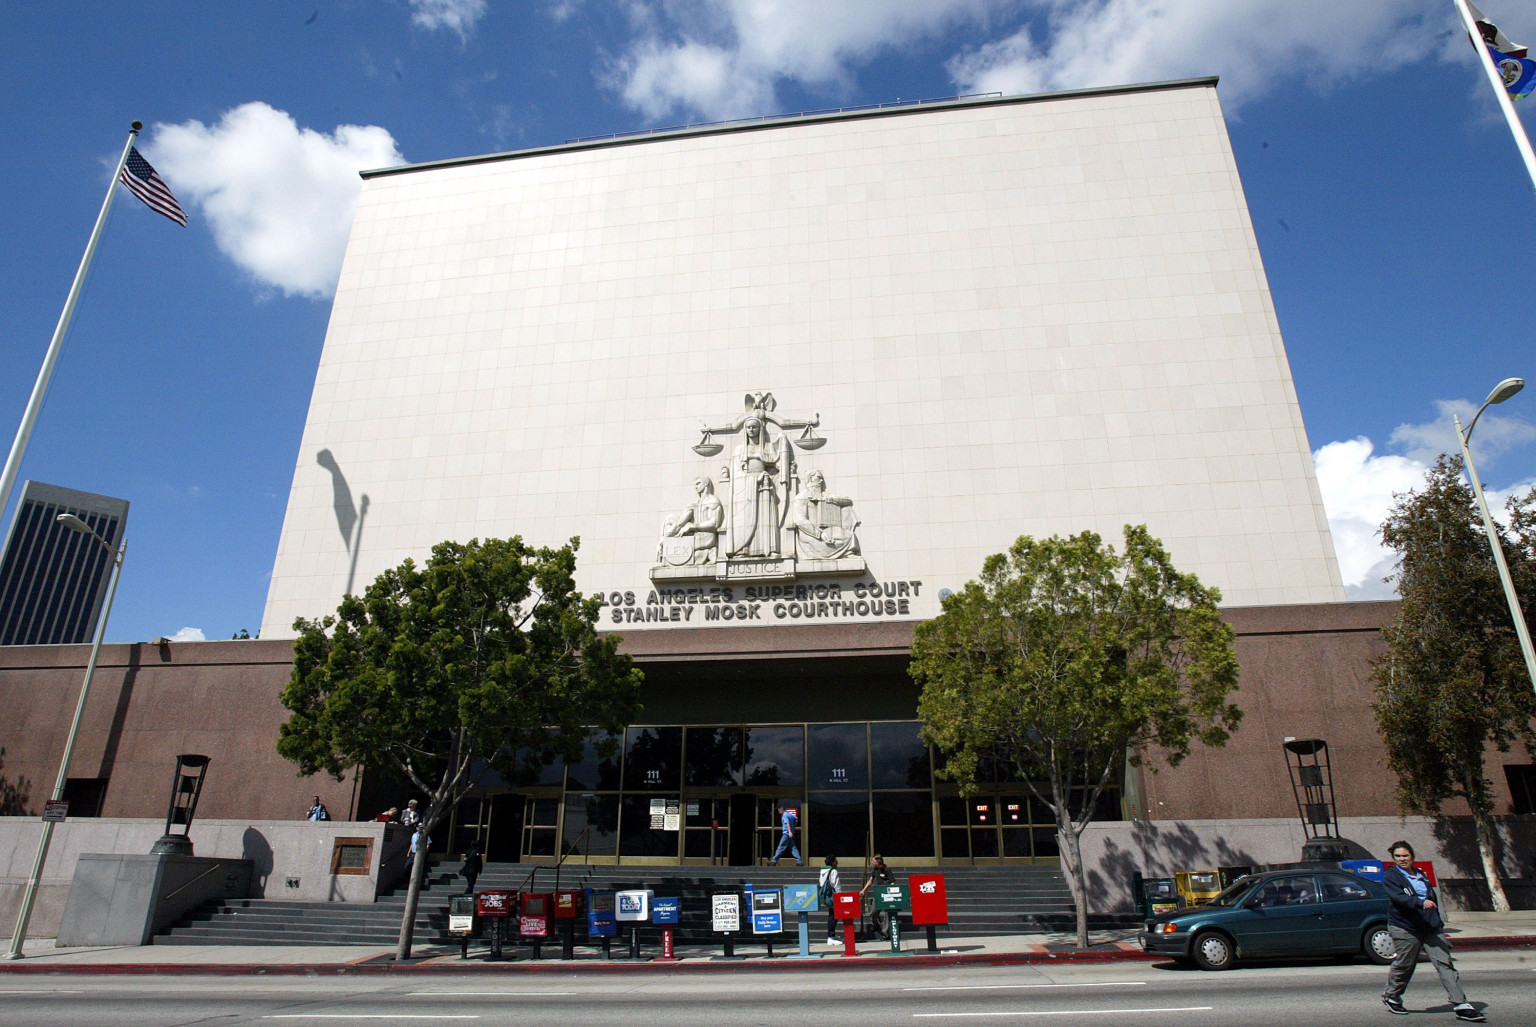 SUPERIOR COURT OF LOS ANGELES COUNTY TO RE OPEN TODAY FOR ESSENTIAL AND